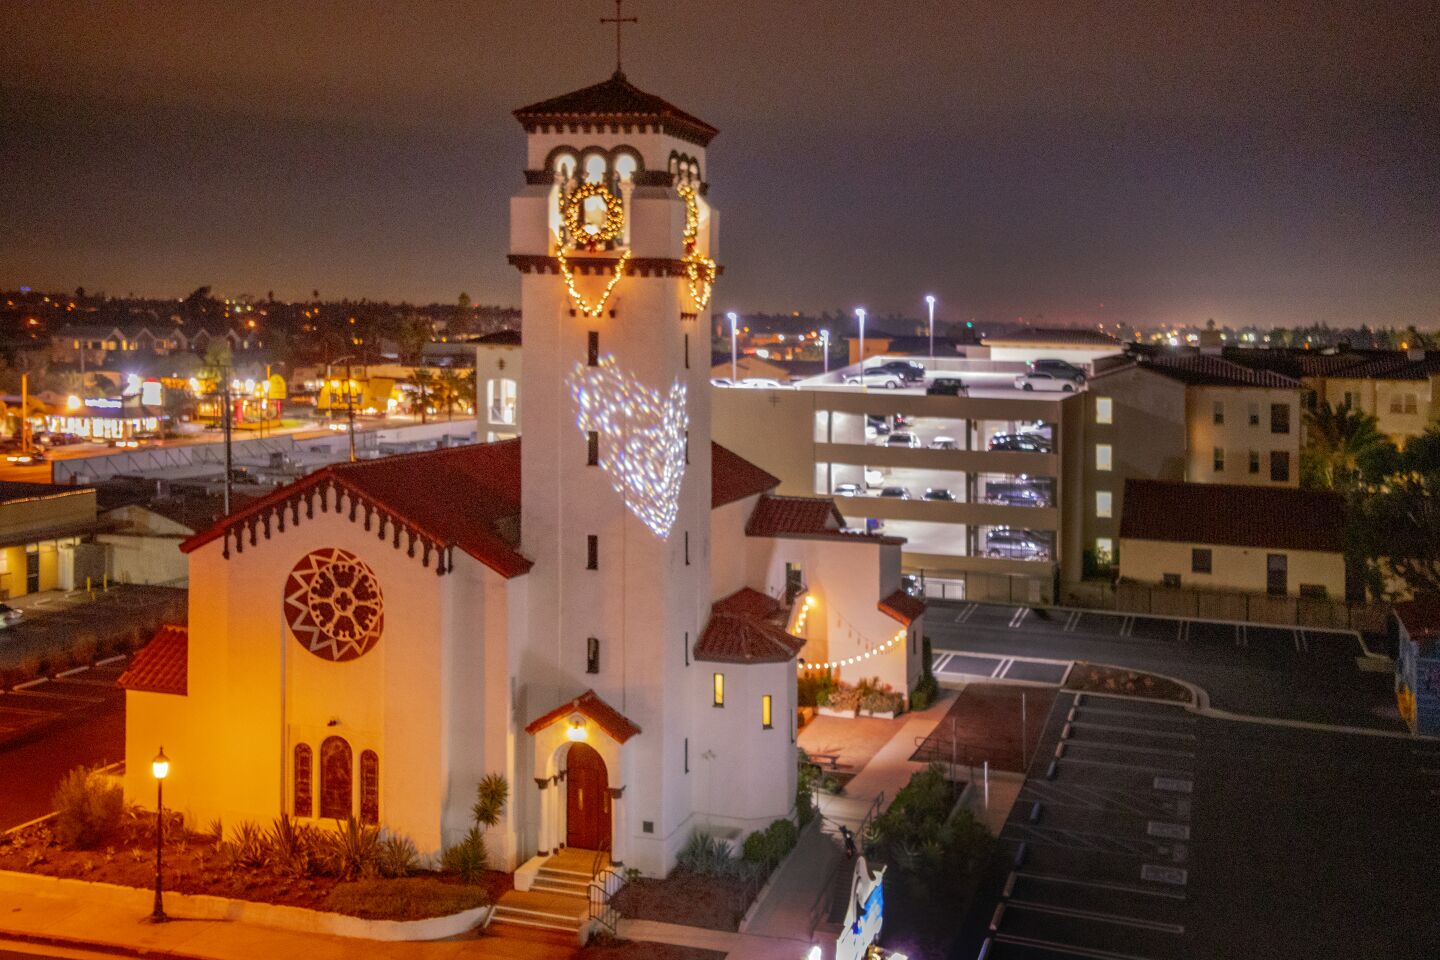 The 92-year-old bell tower at First United Methodist Church in Costa Mesa glows with Christmas lights Sunday night as part of the church's second annual Shine Bright festivities.